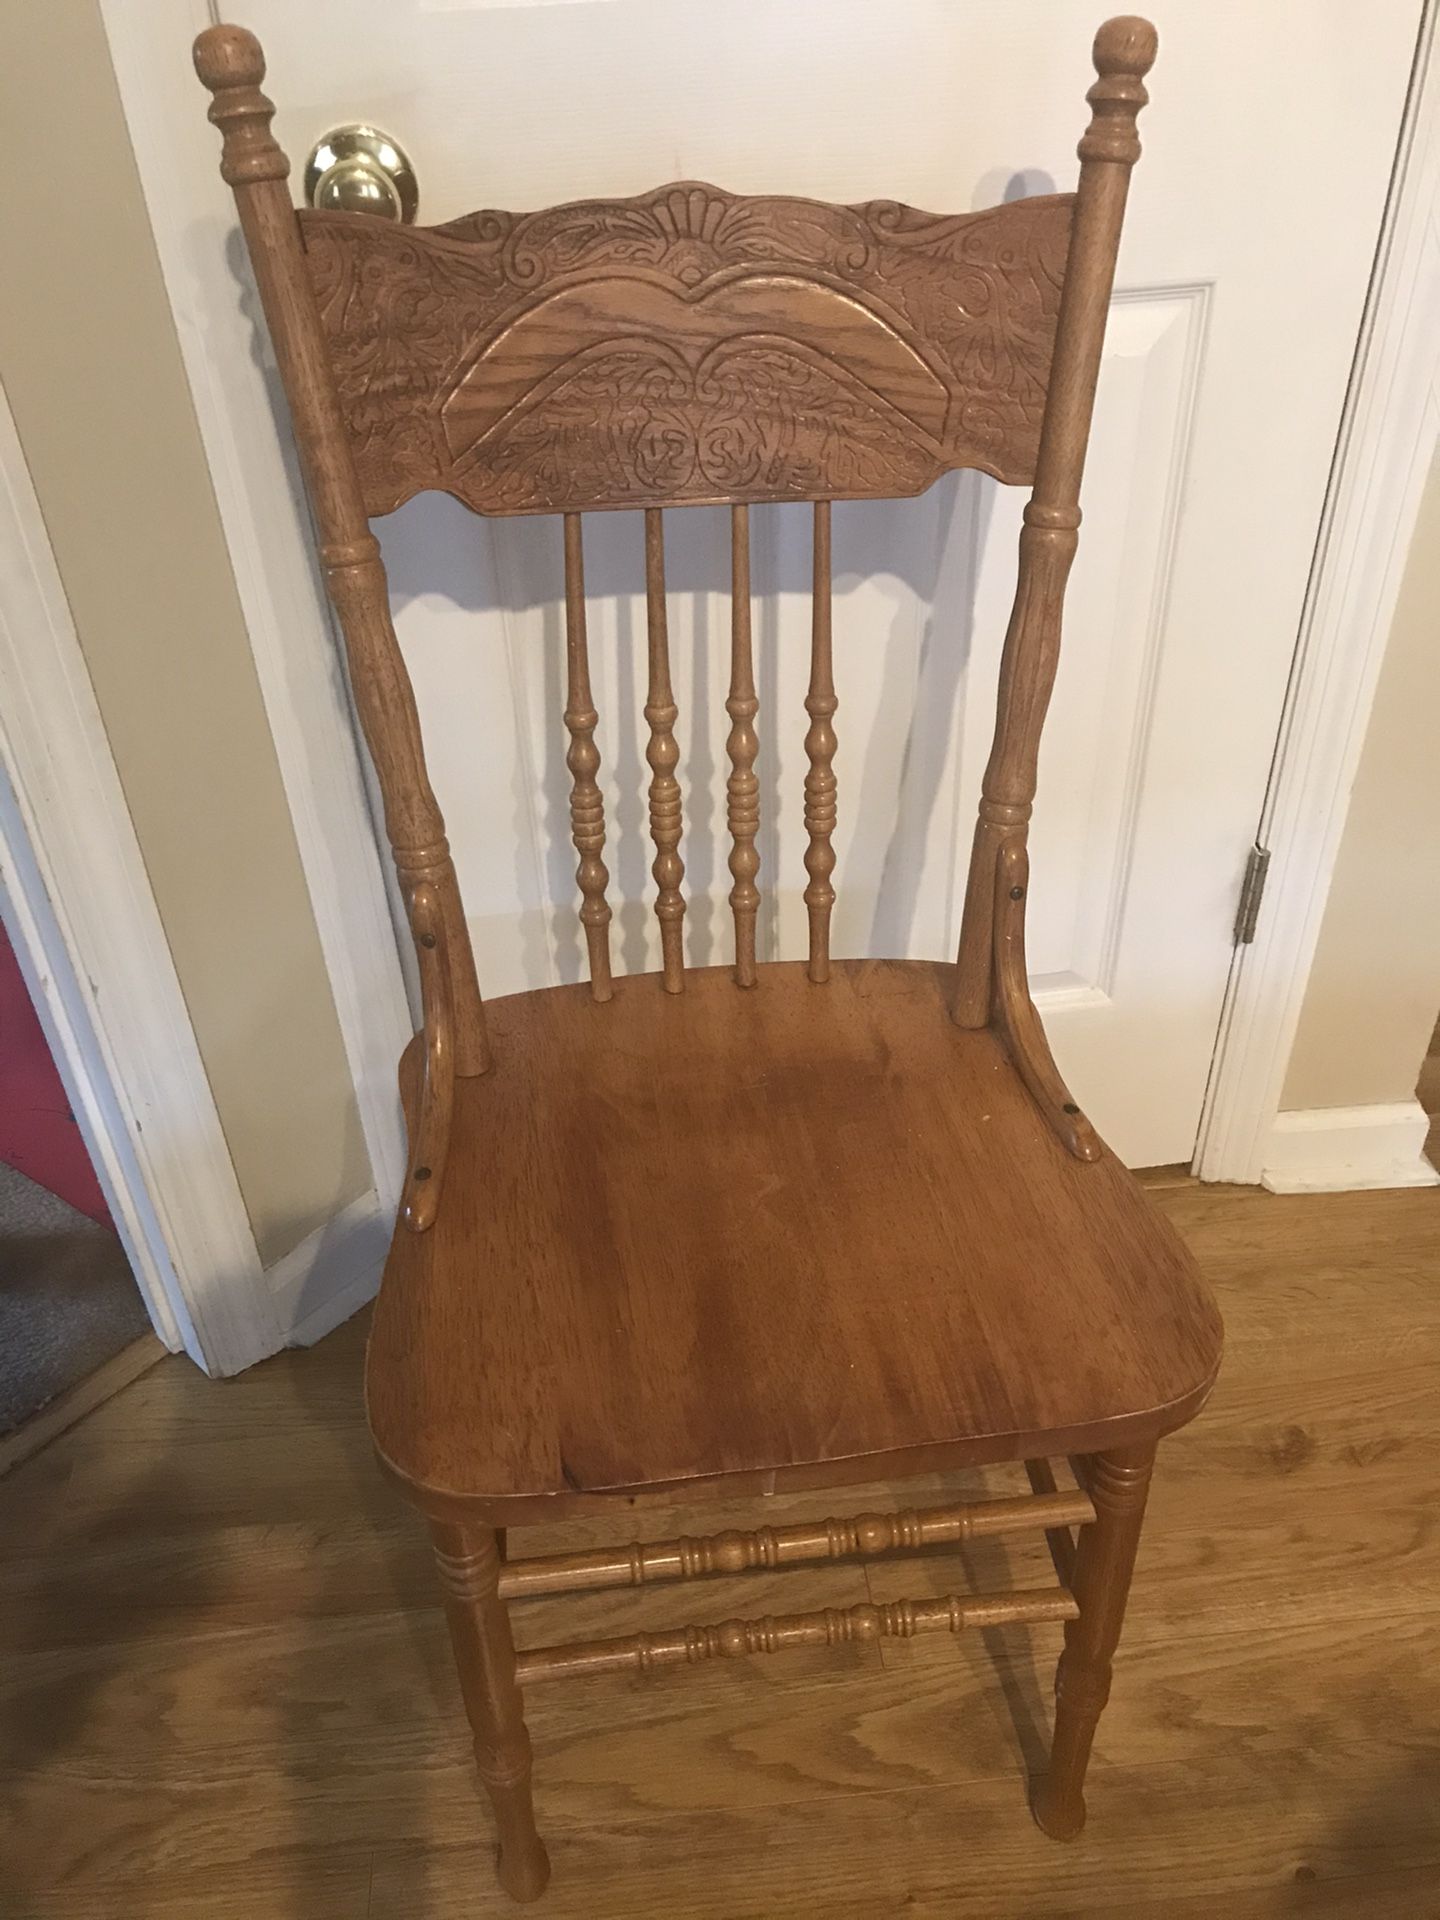 Nice wooden chair good condition like new